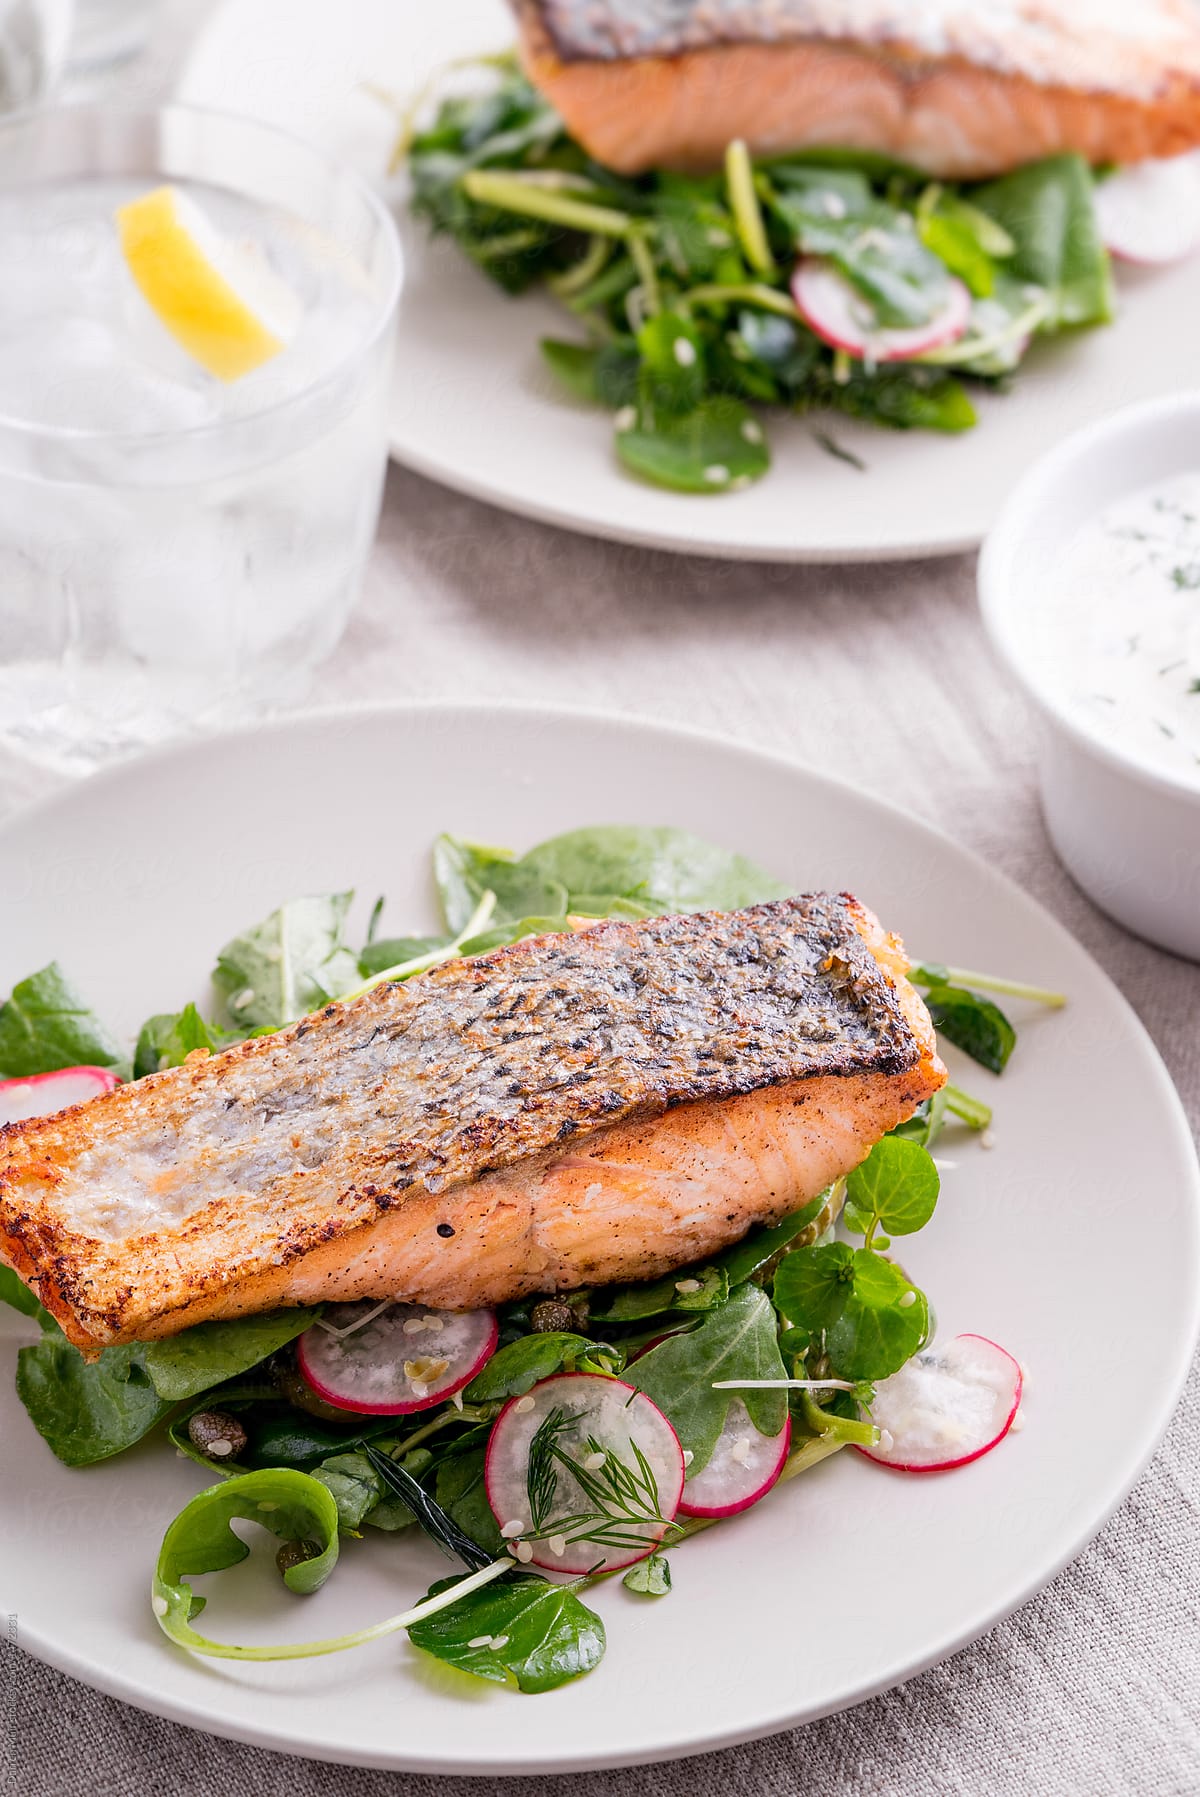 Roasted salmon fillets with spinach and radish salad.